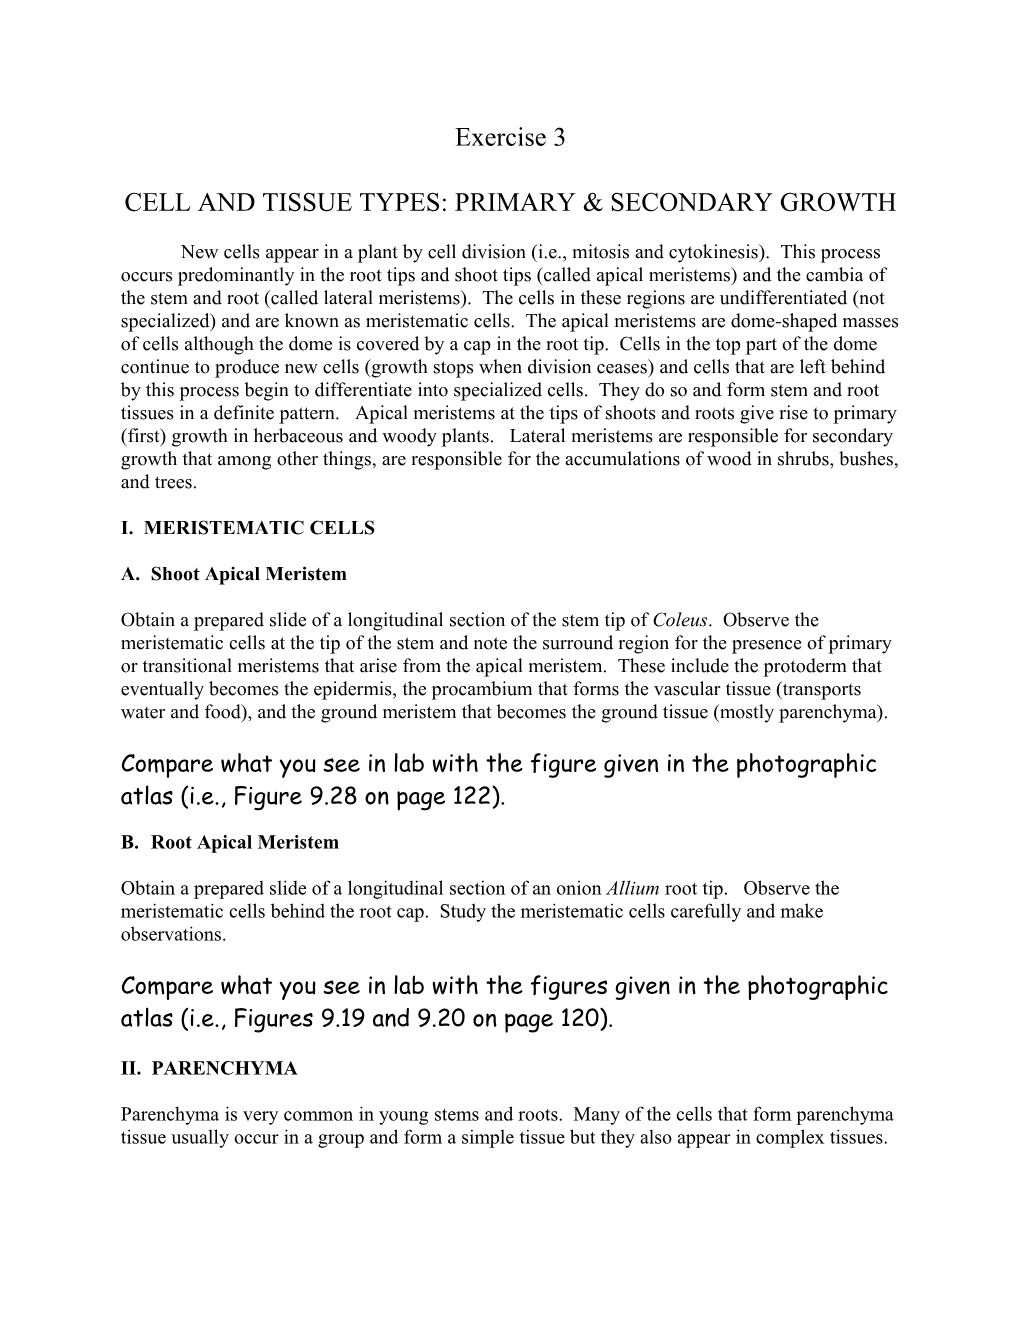 Cell and Tissue Types: Primary & Secondary Growth